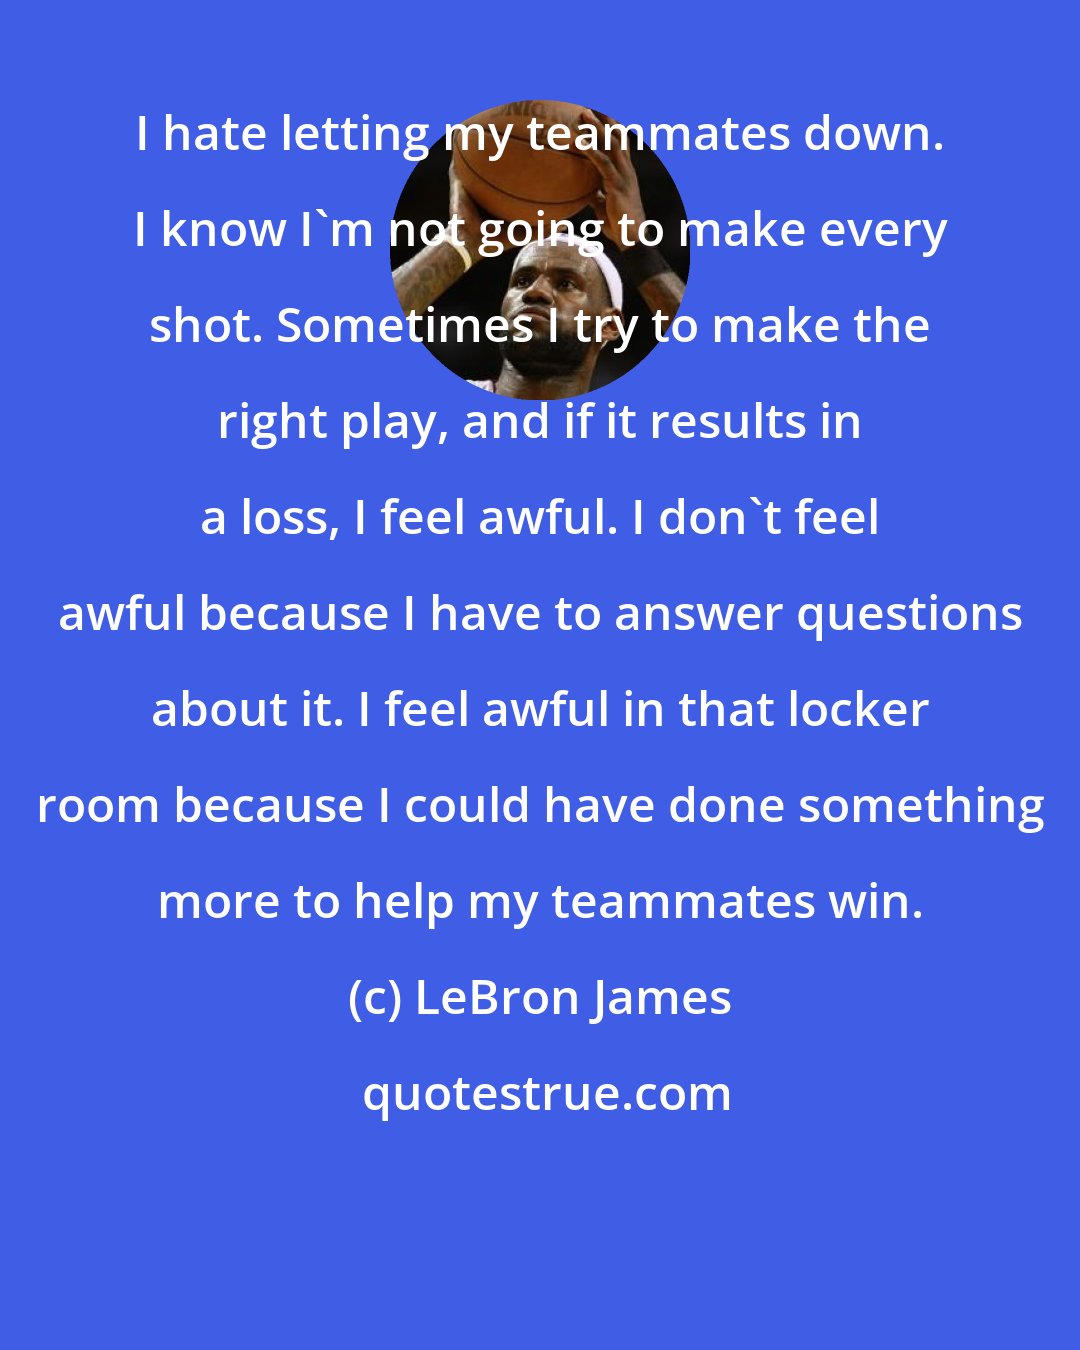 LeBron James: I hate letting my teammates down. I know I'm not going to make every shot. Sometimes I try to make the right play, and if it results in a loss, I feel awful. I don't feel awful because I have to answer questions about it. I feel awful in that locker room because I could have done something more to help my teammates win.